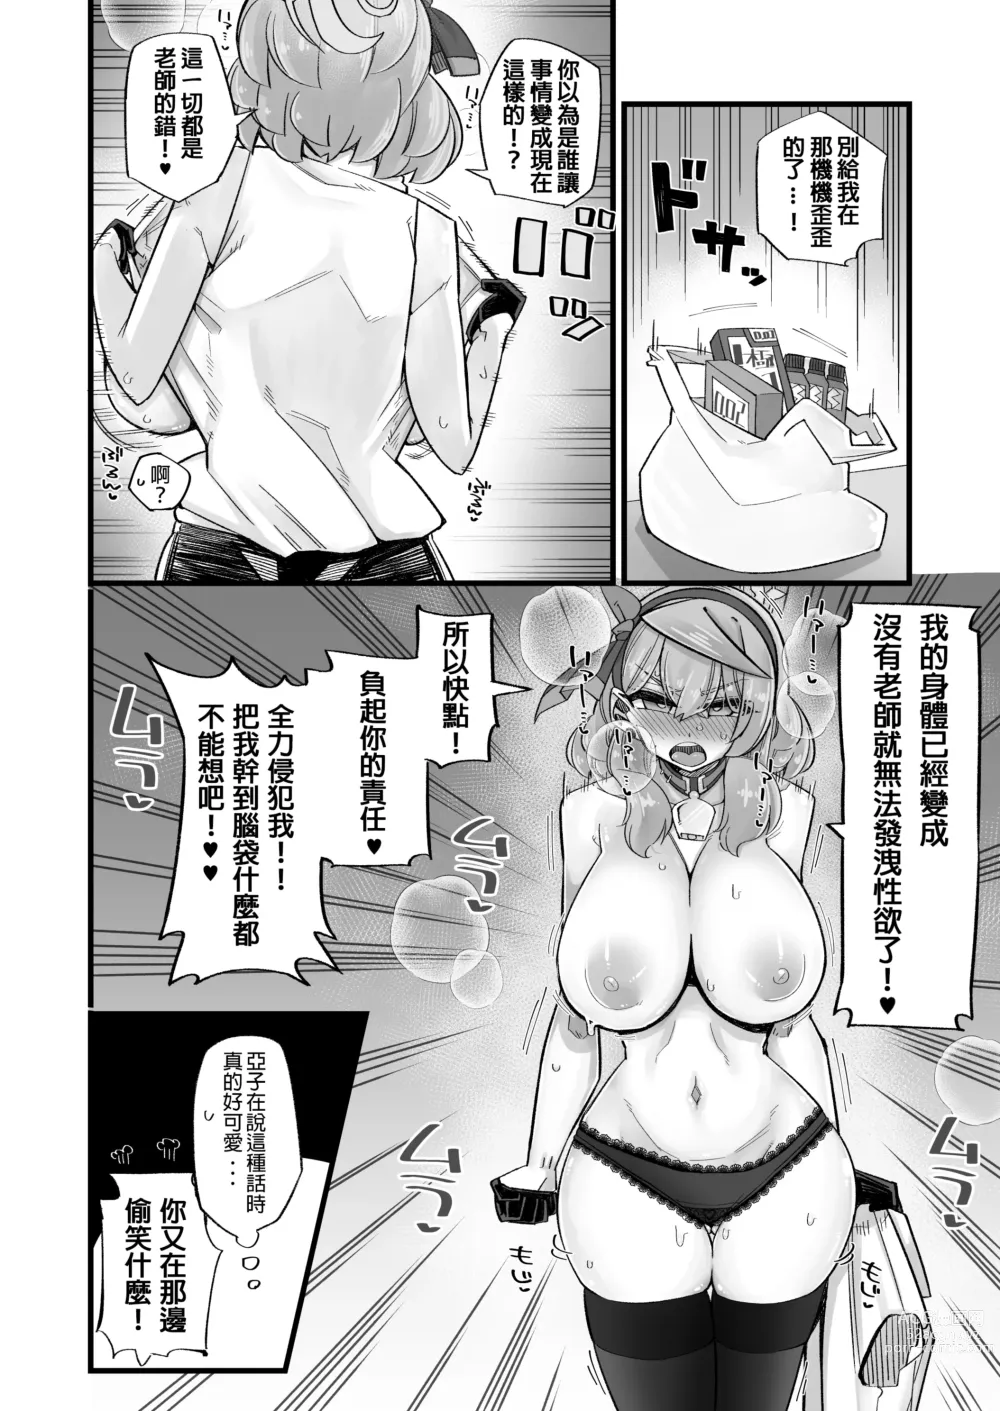 Page 14 of doujinshi Ako's Stress Relieving Sex